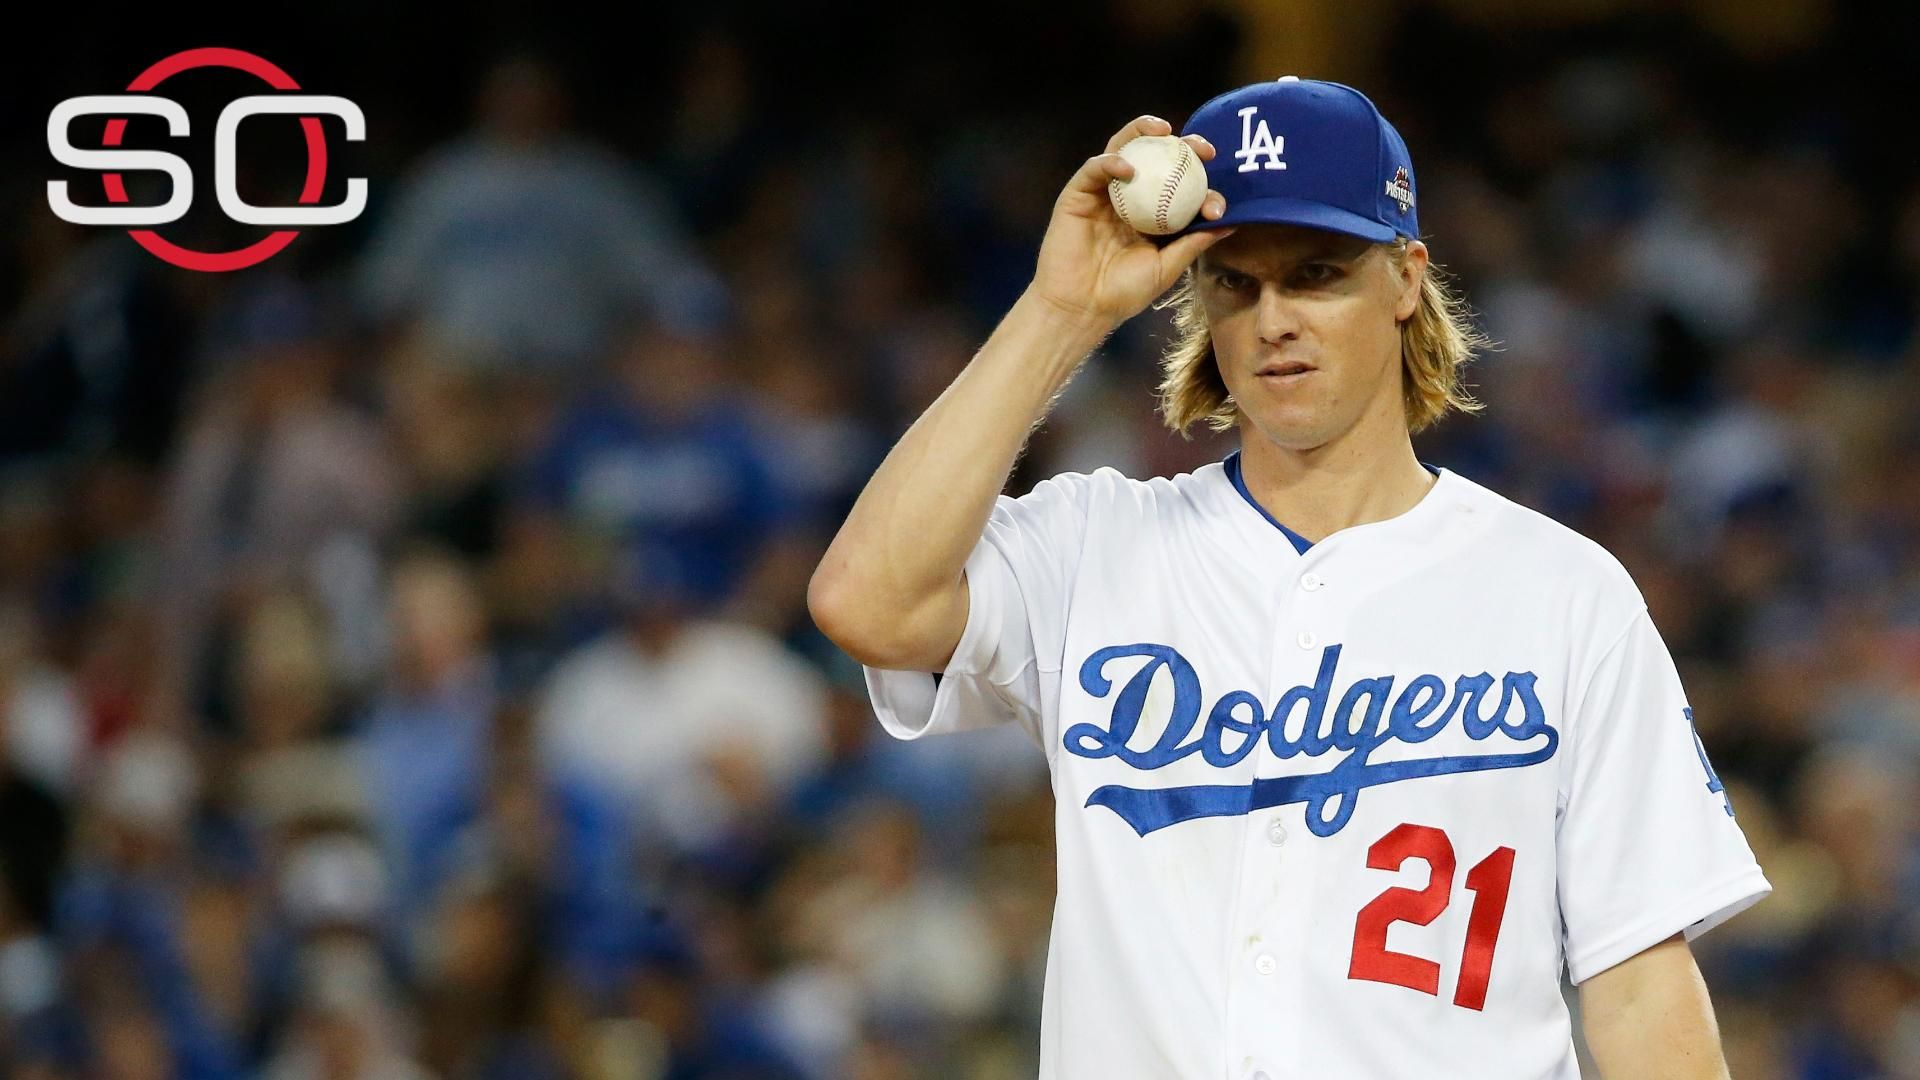 Report: Zack Greinke to opt out of contract with Dodgers - ABC7 New York